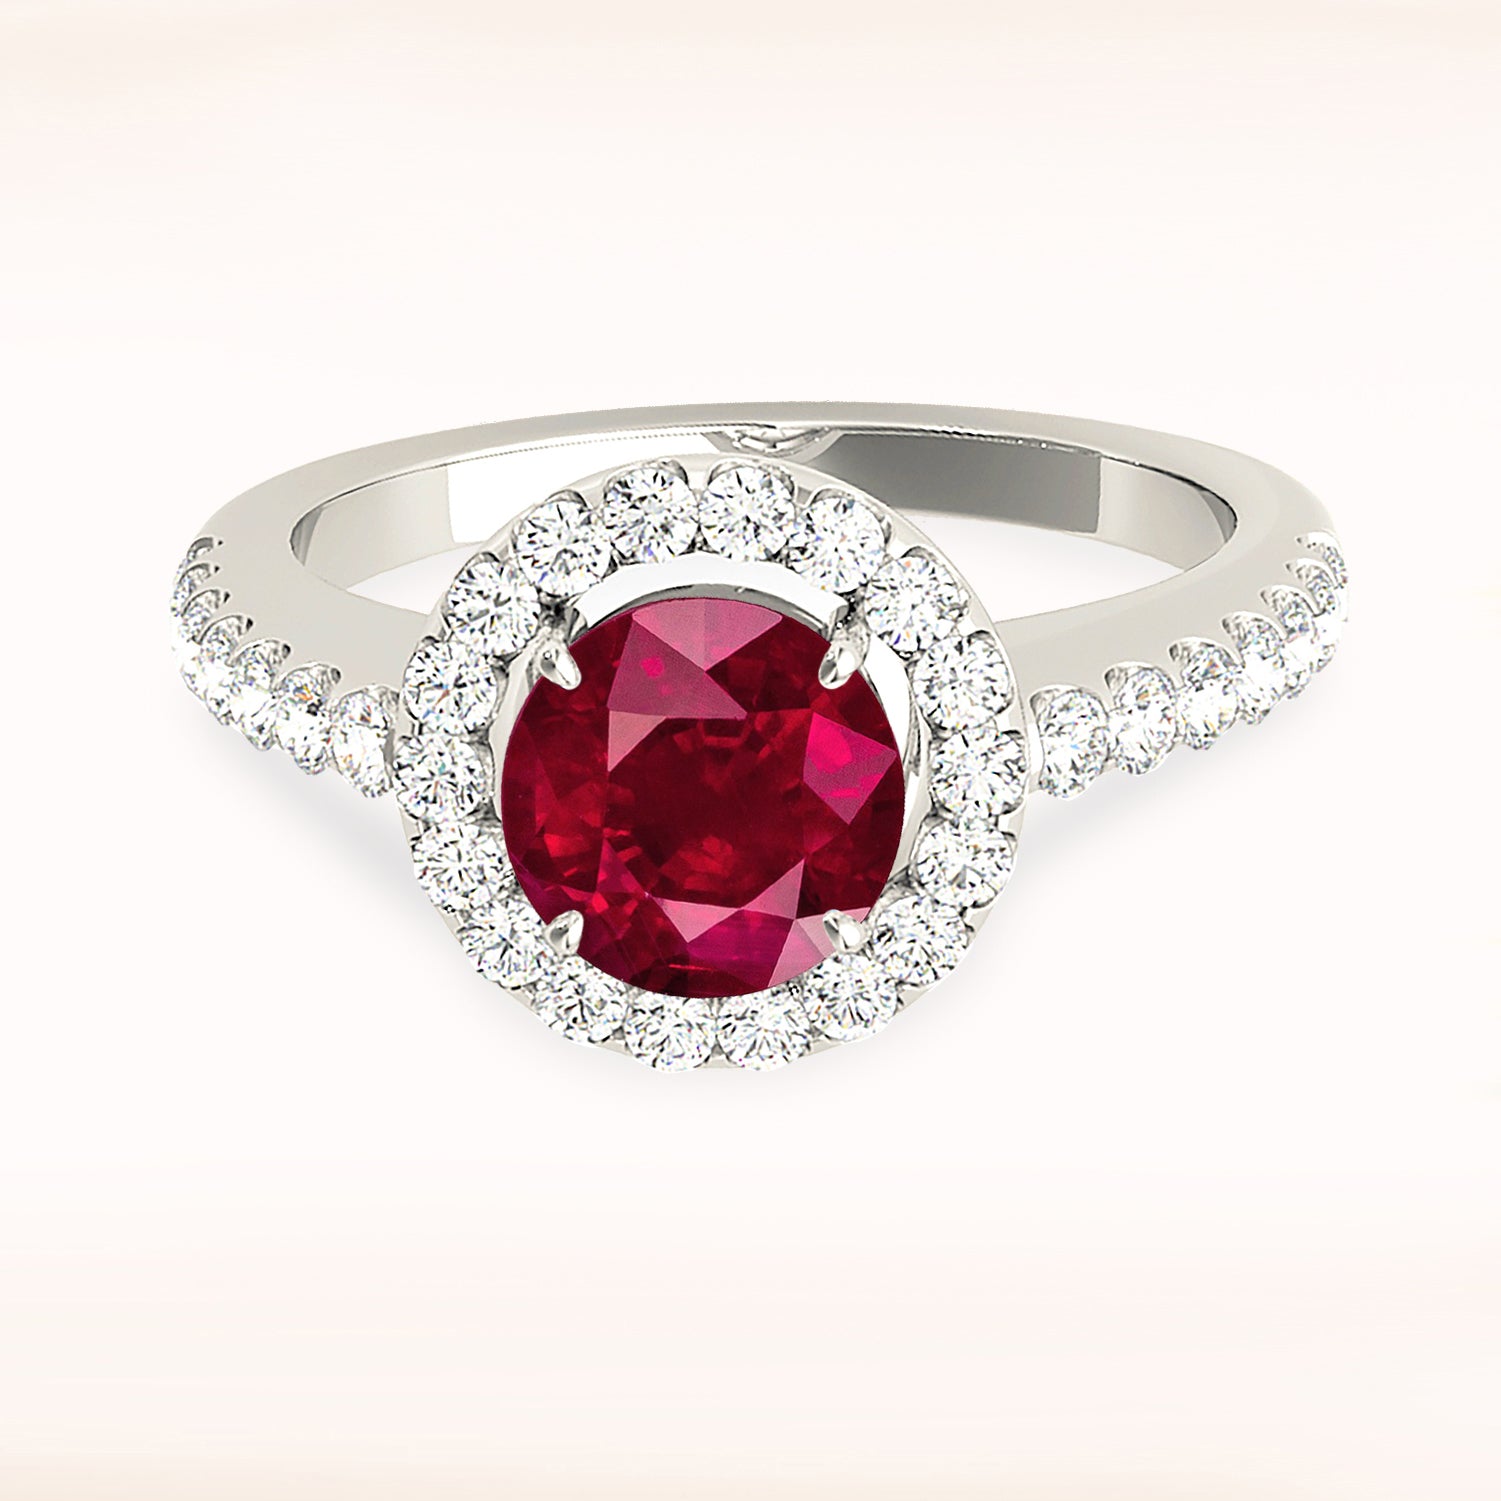 1.35 ct. Genuine Ruby Ring With 0.50 ctw. Diamond Halo And Delicate Diamond Band-in 14K/18K White, Yellow, Rose Gold and Platinum - Christmas Jewelry Gift -VIRABYANI